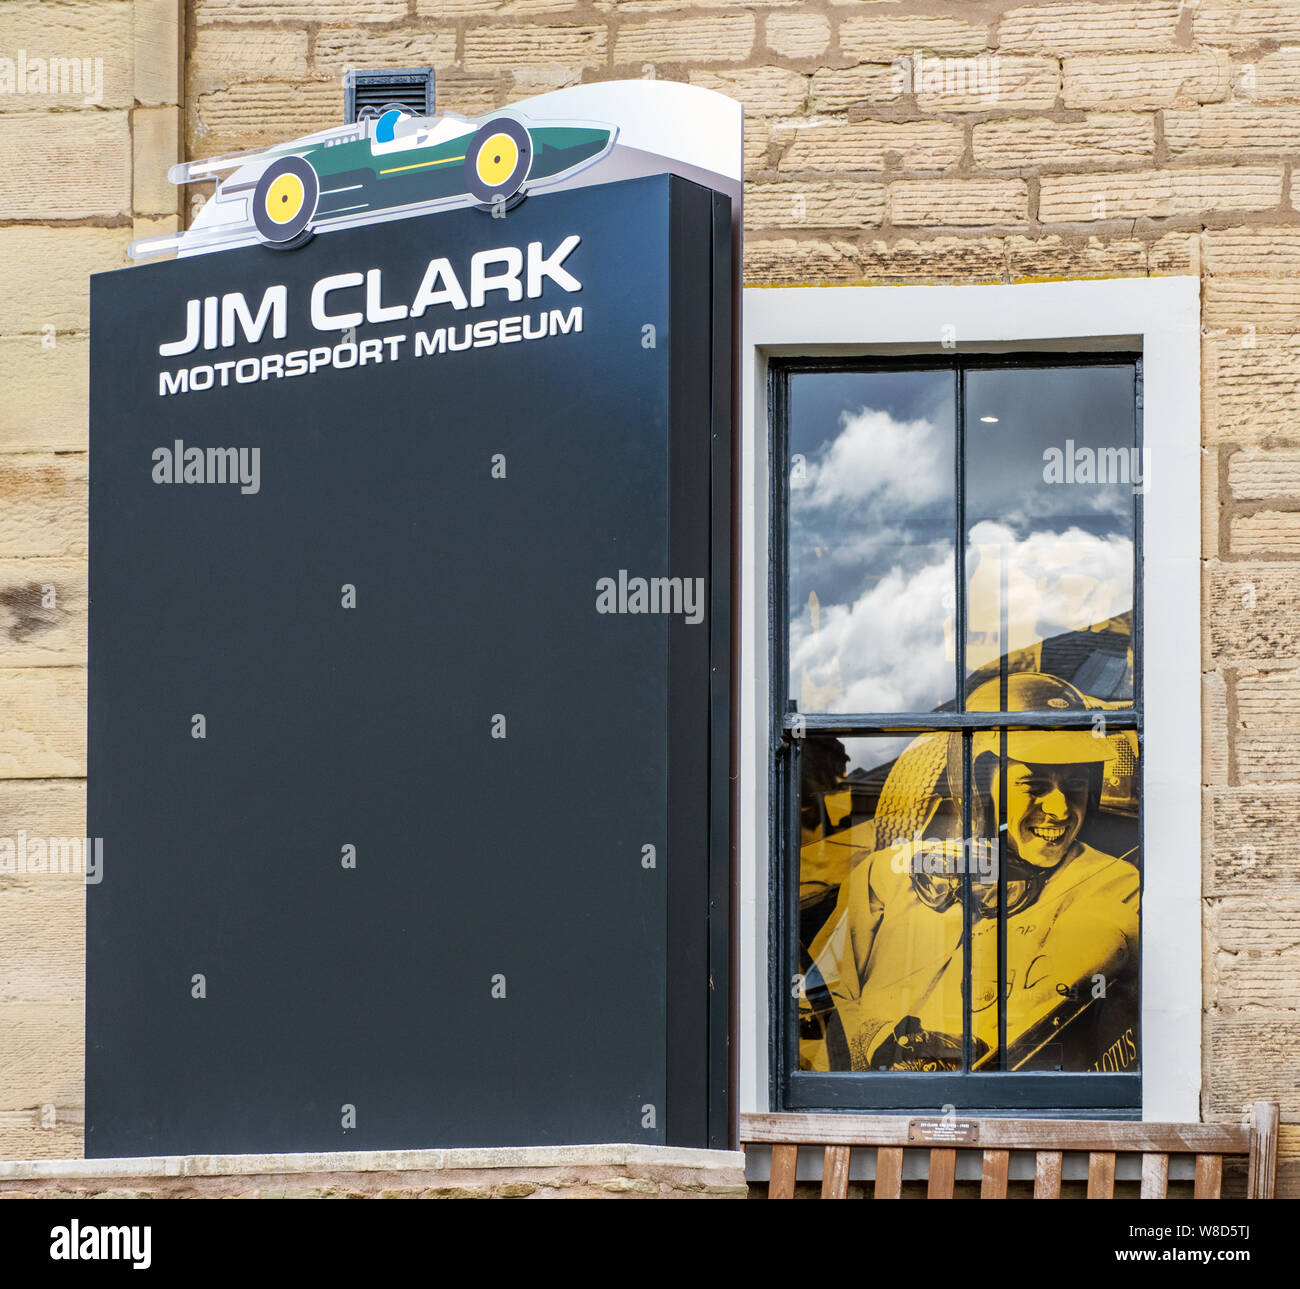 The Jim Clark Motorsport Museum in the market town of Duns in the Scottish Borders is dedicated to the life and motor racing career of Jim Clark. Stock Photo